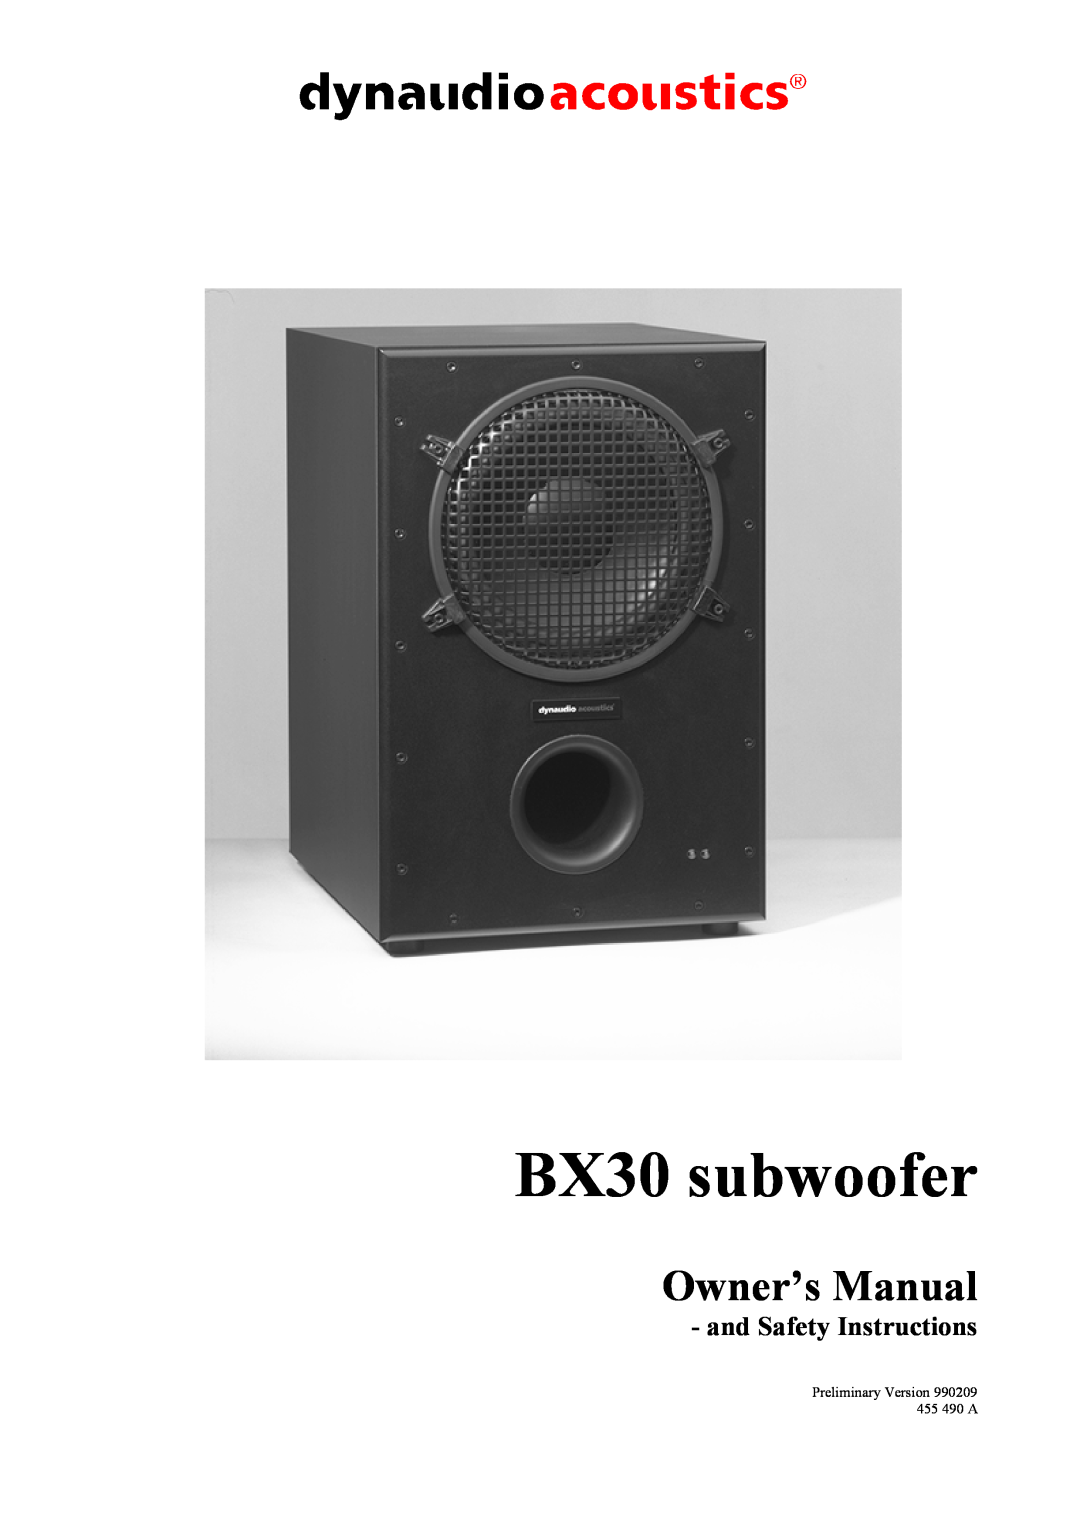 Dynaudio owner manual BX30 subwoofer, and Safety Instructions, Preliminary Version 990209 455 490 A 